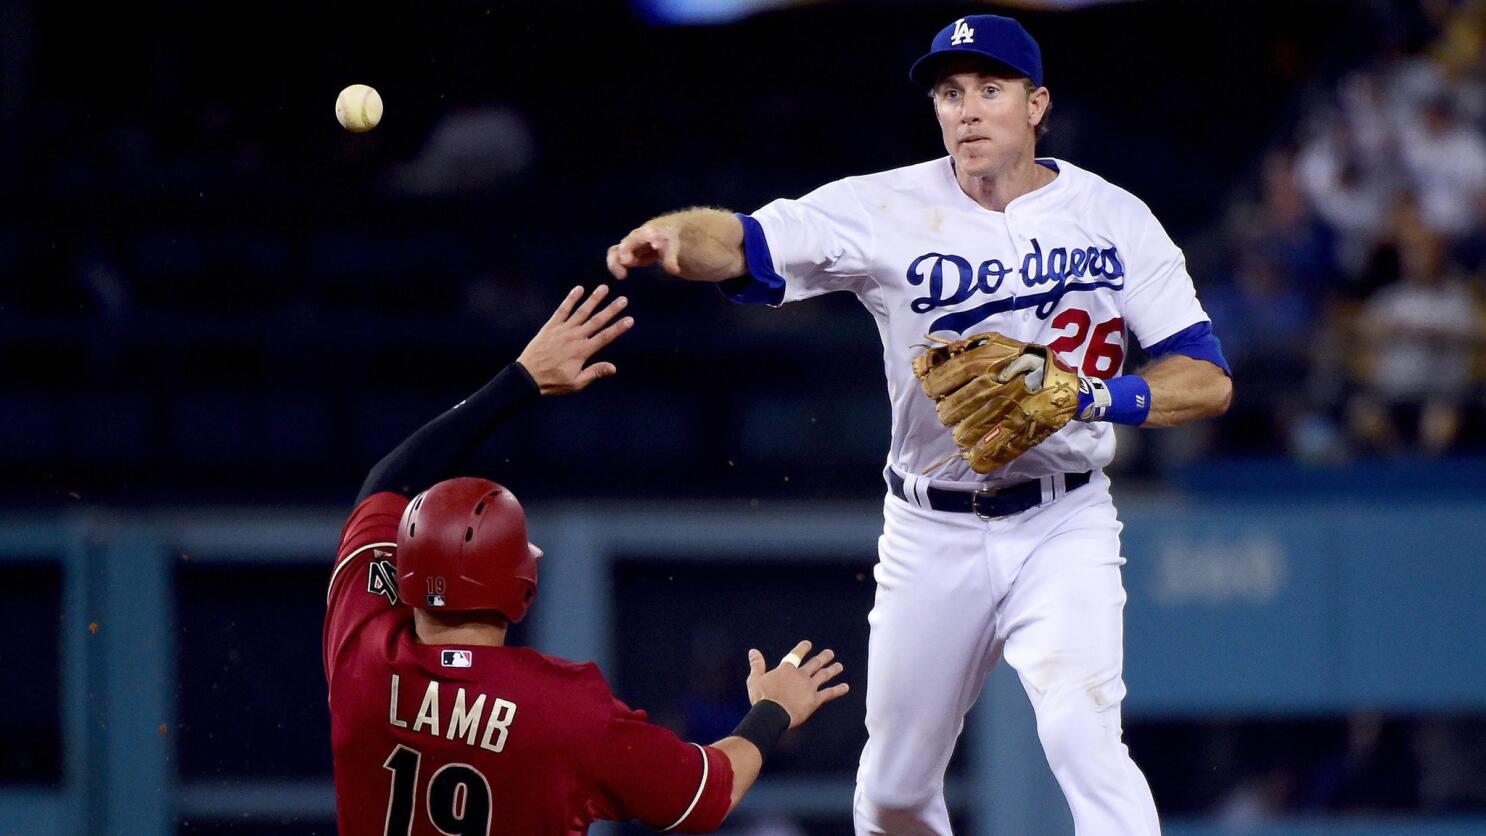 The career of Chase Utley - Minor League Ball